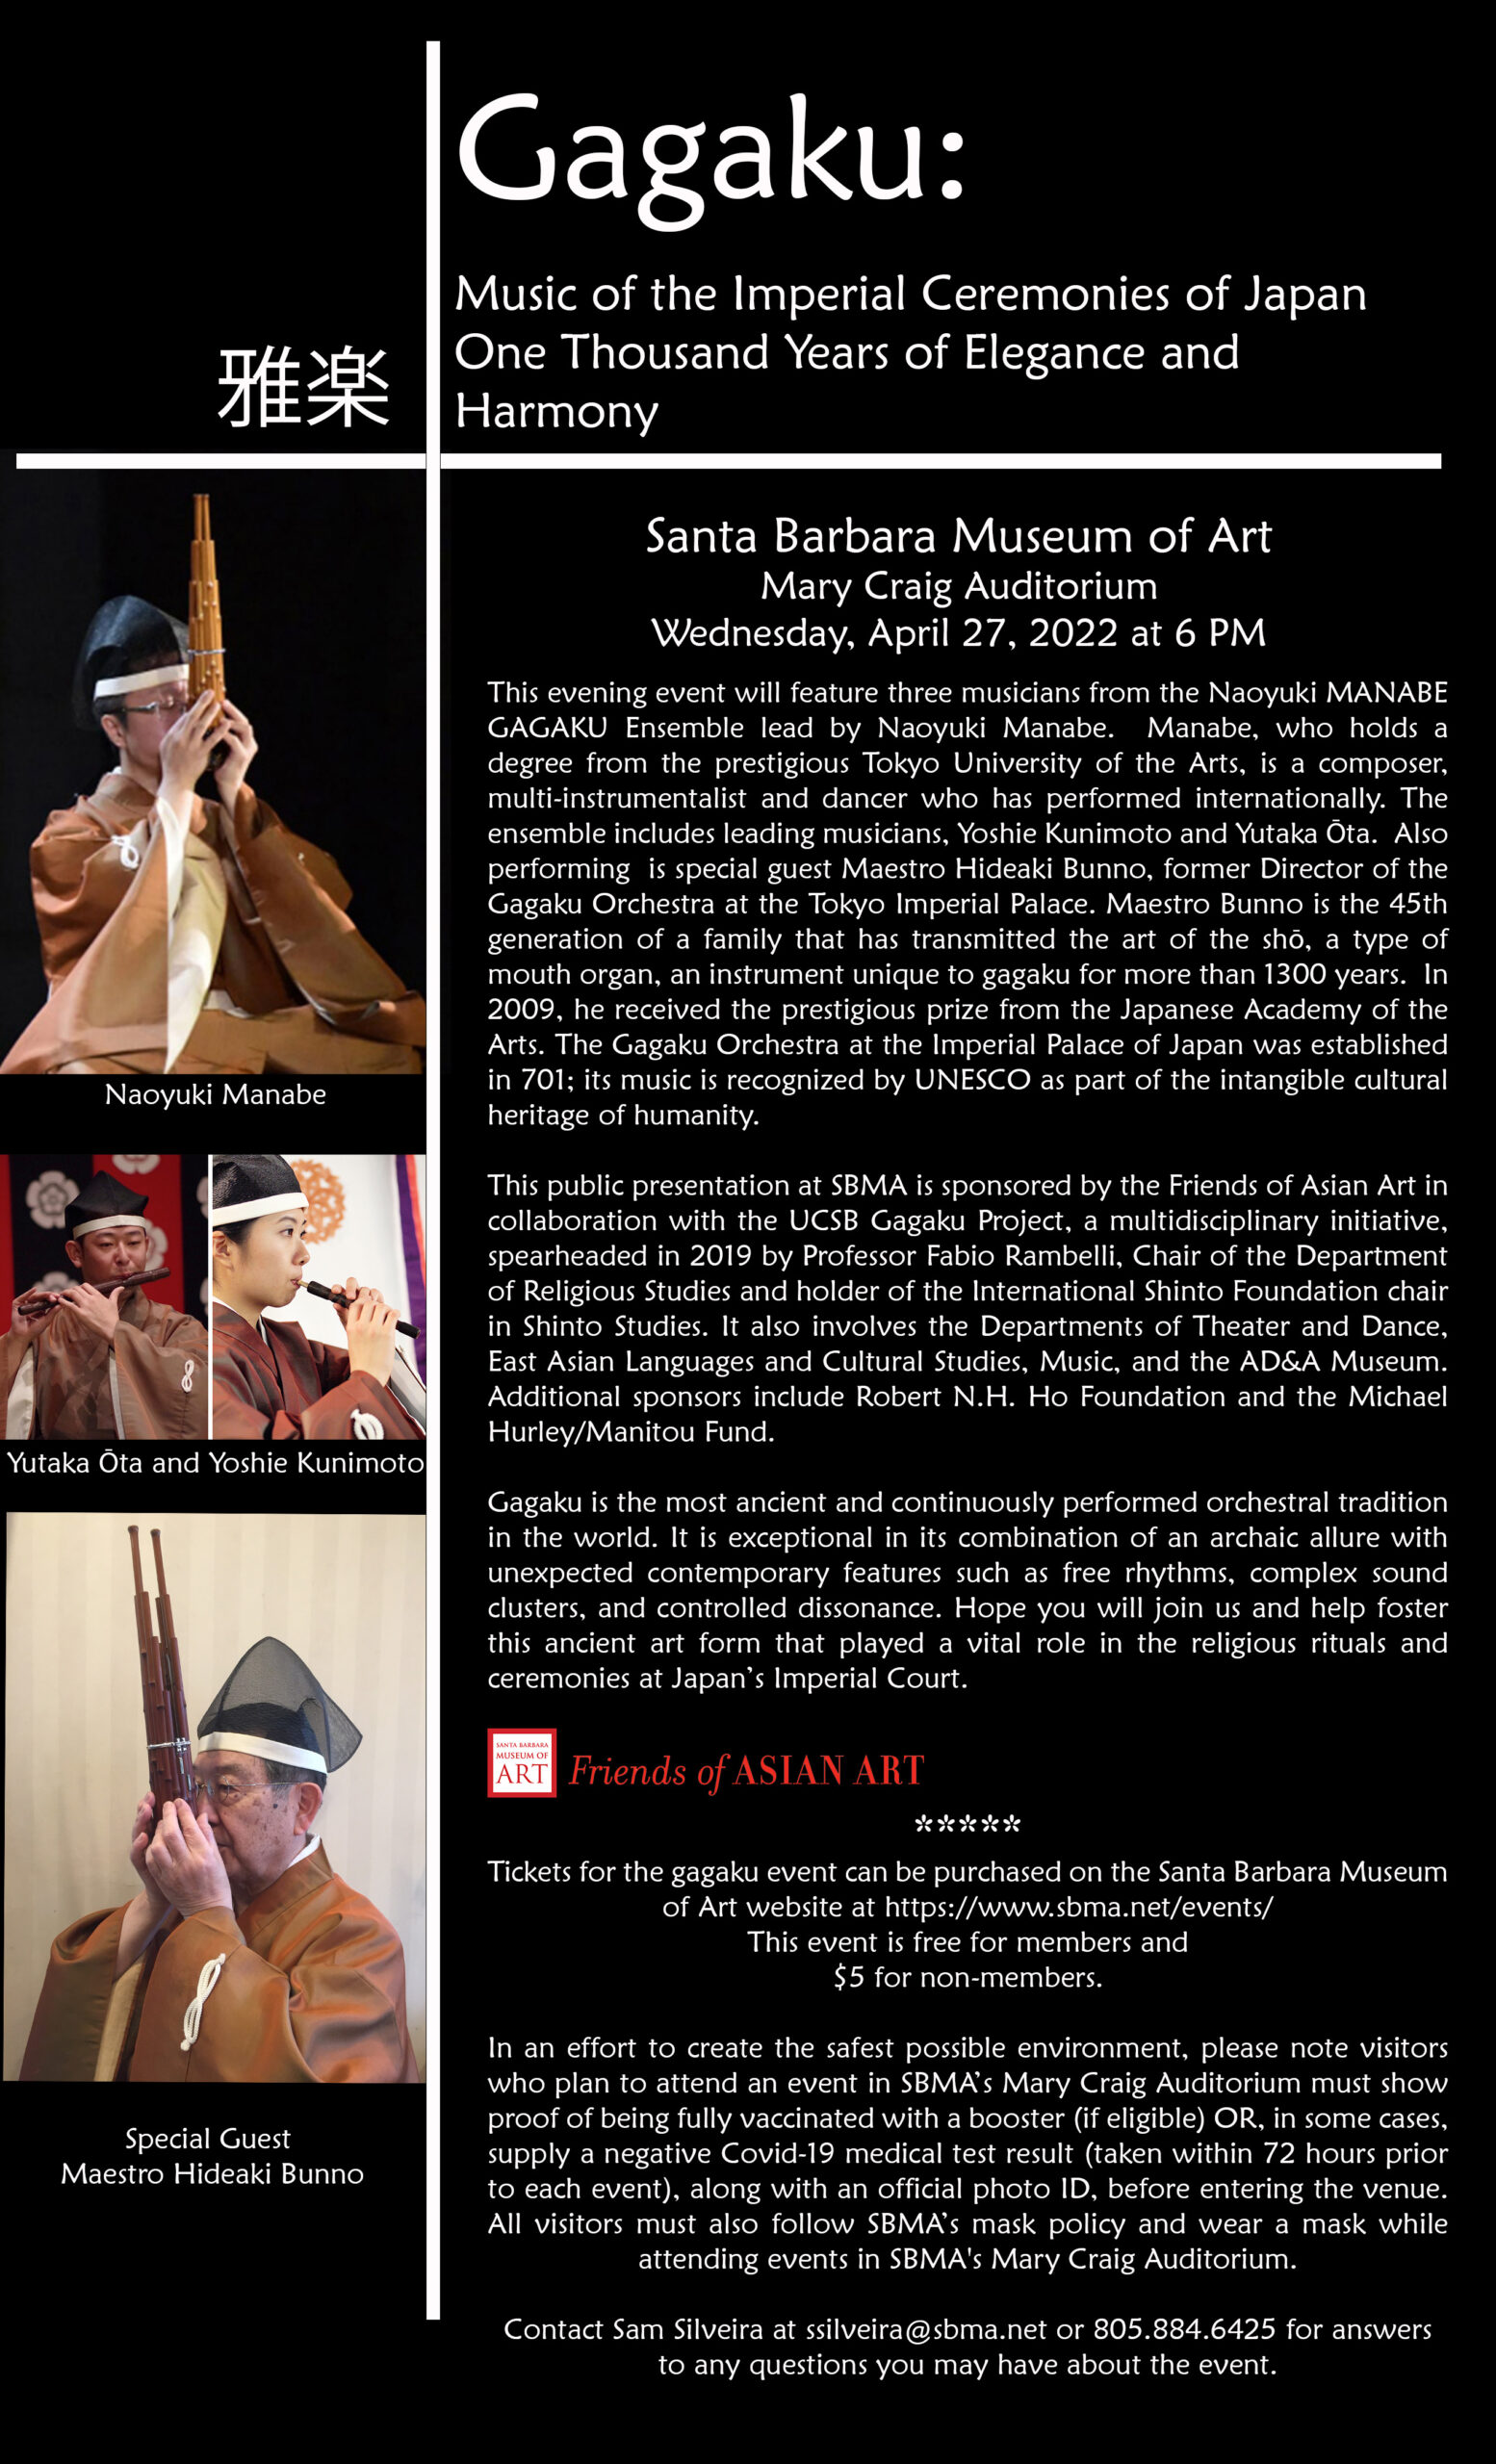 Flyer for "Gagaku: Music of the Imperial Ceremonies of Japan One Thousand Years of Elegance and Harmony" on April 27, 2022 at 6PM at the Santa Barbara Museum of Art, Mary Craig Auditorium